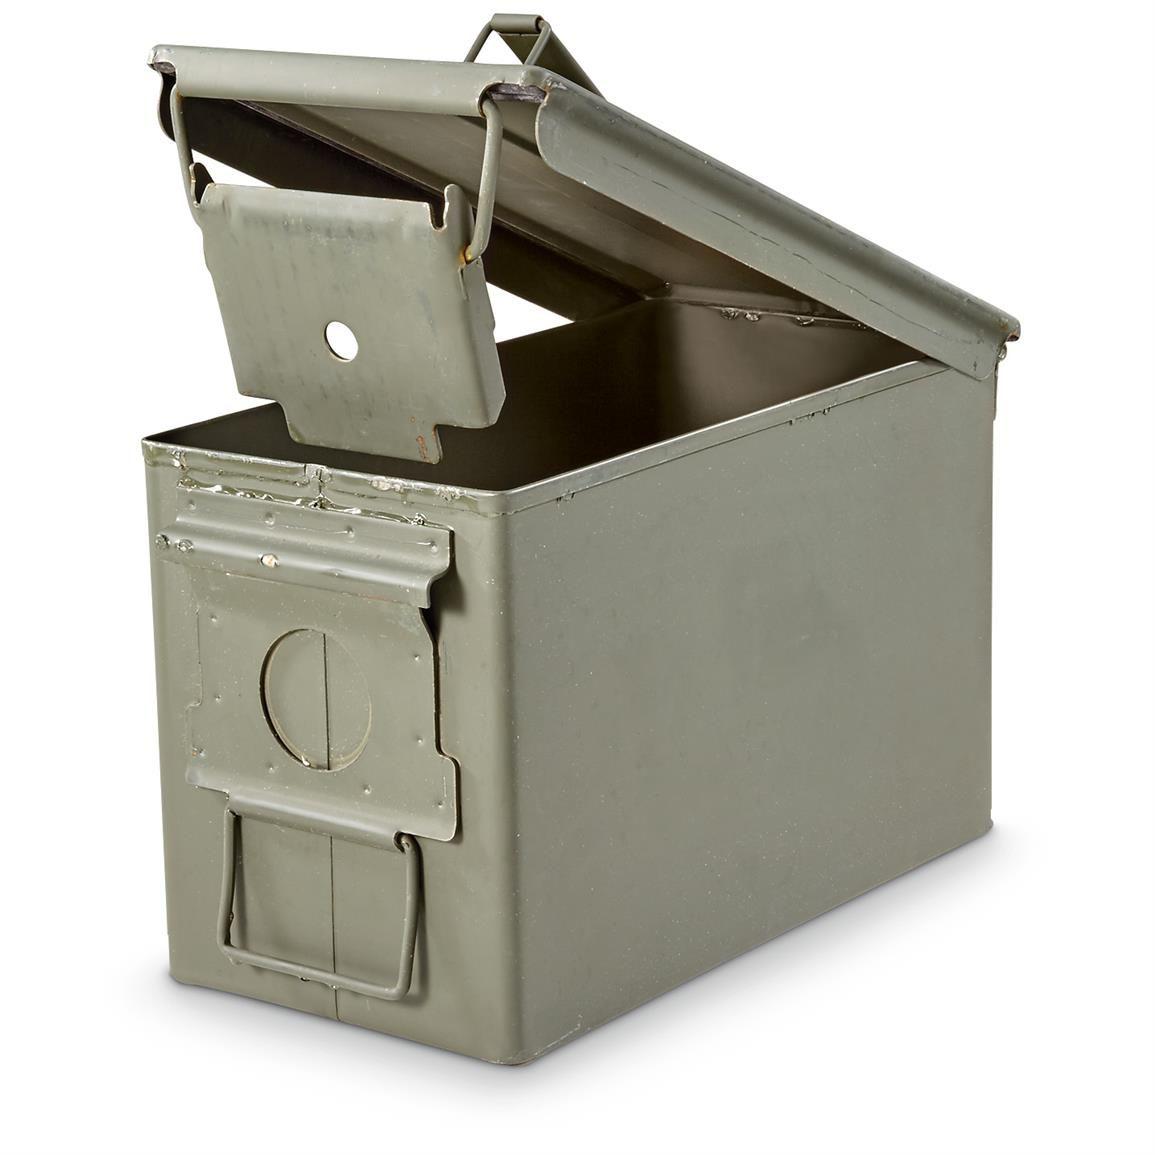 Ammo Box Logo - Military Surplus Ammo Cans & Military Storage. Sportsman's Guide